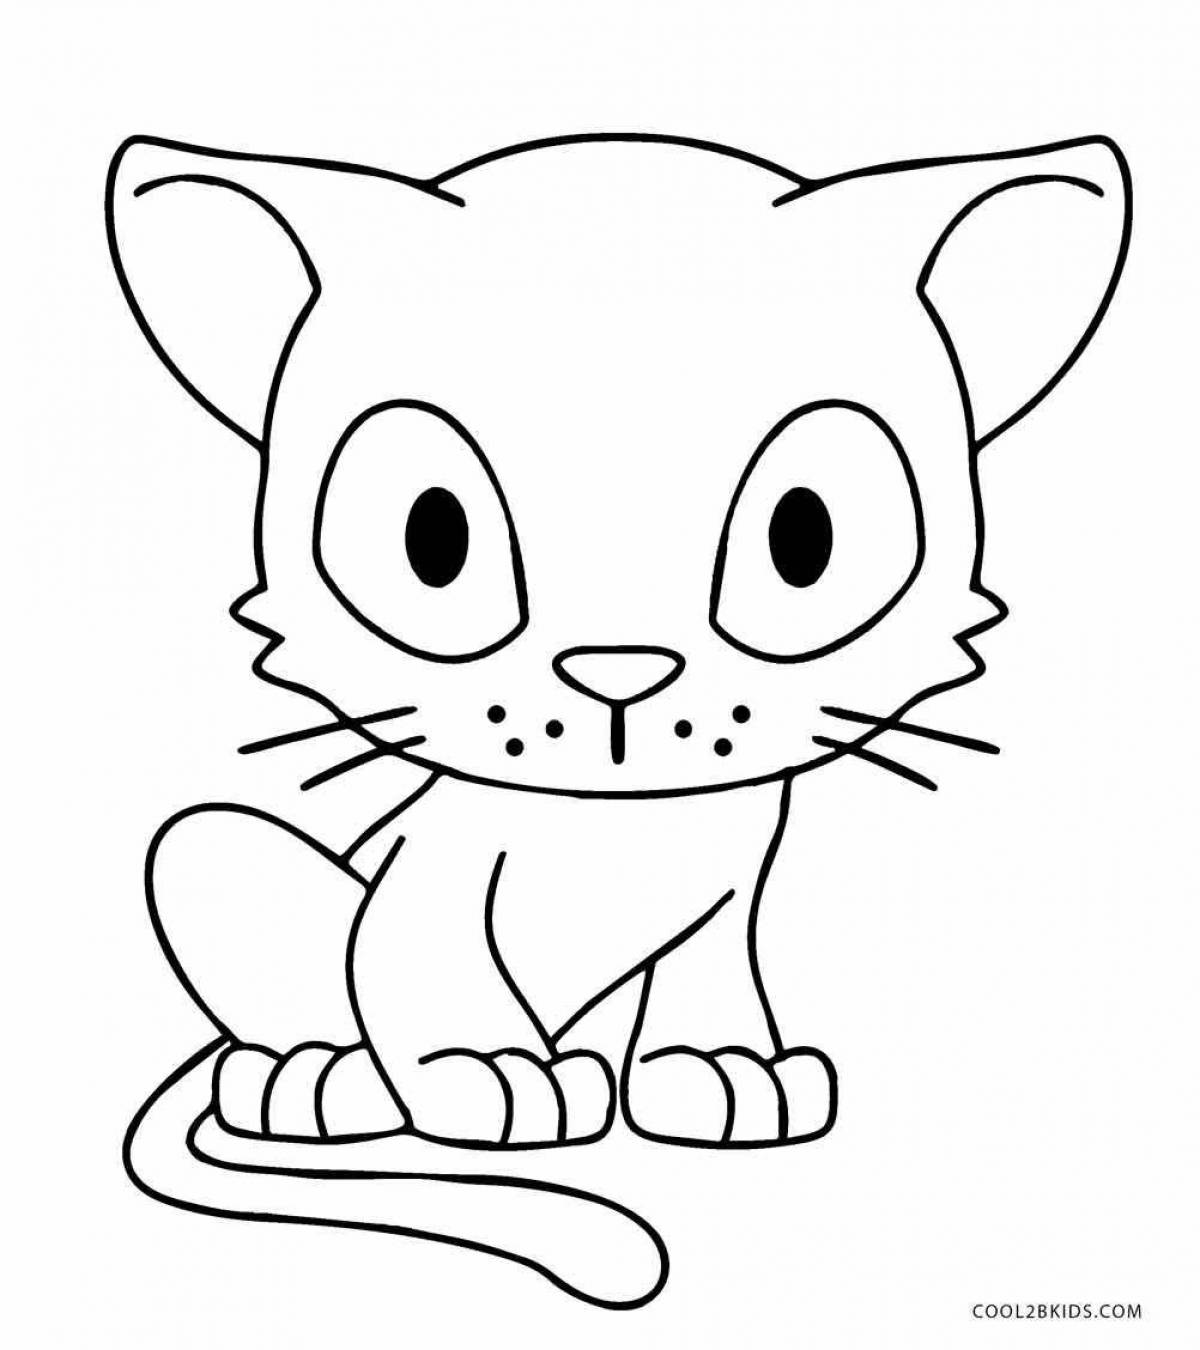 Violent kittens coloring page